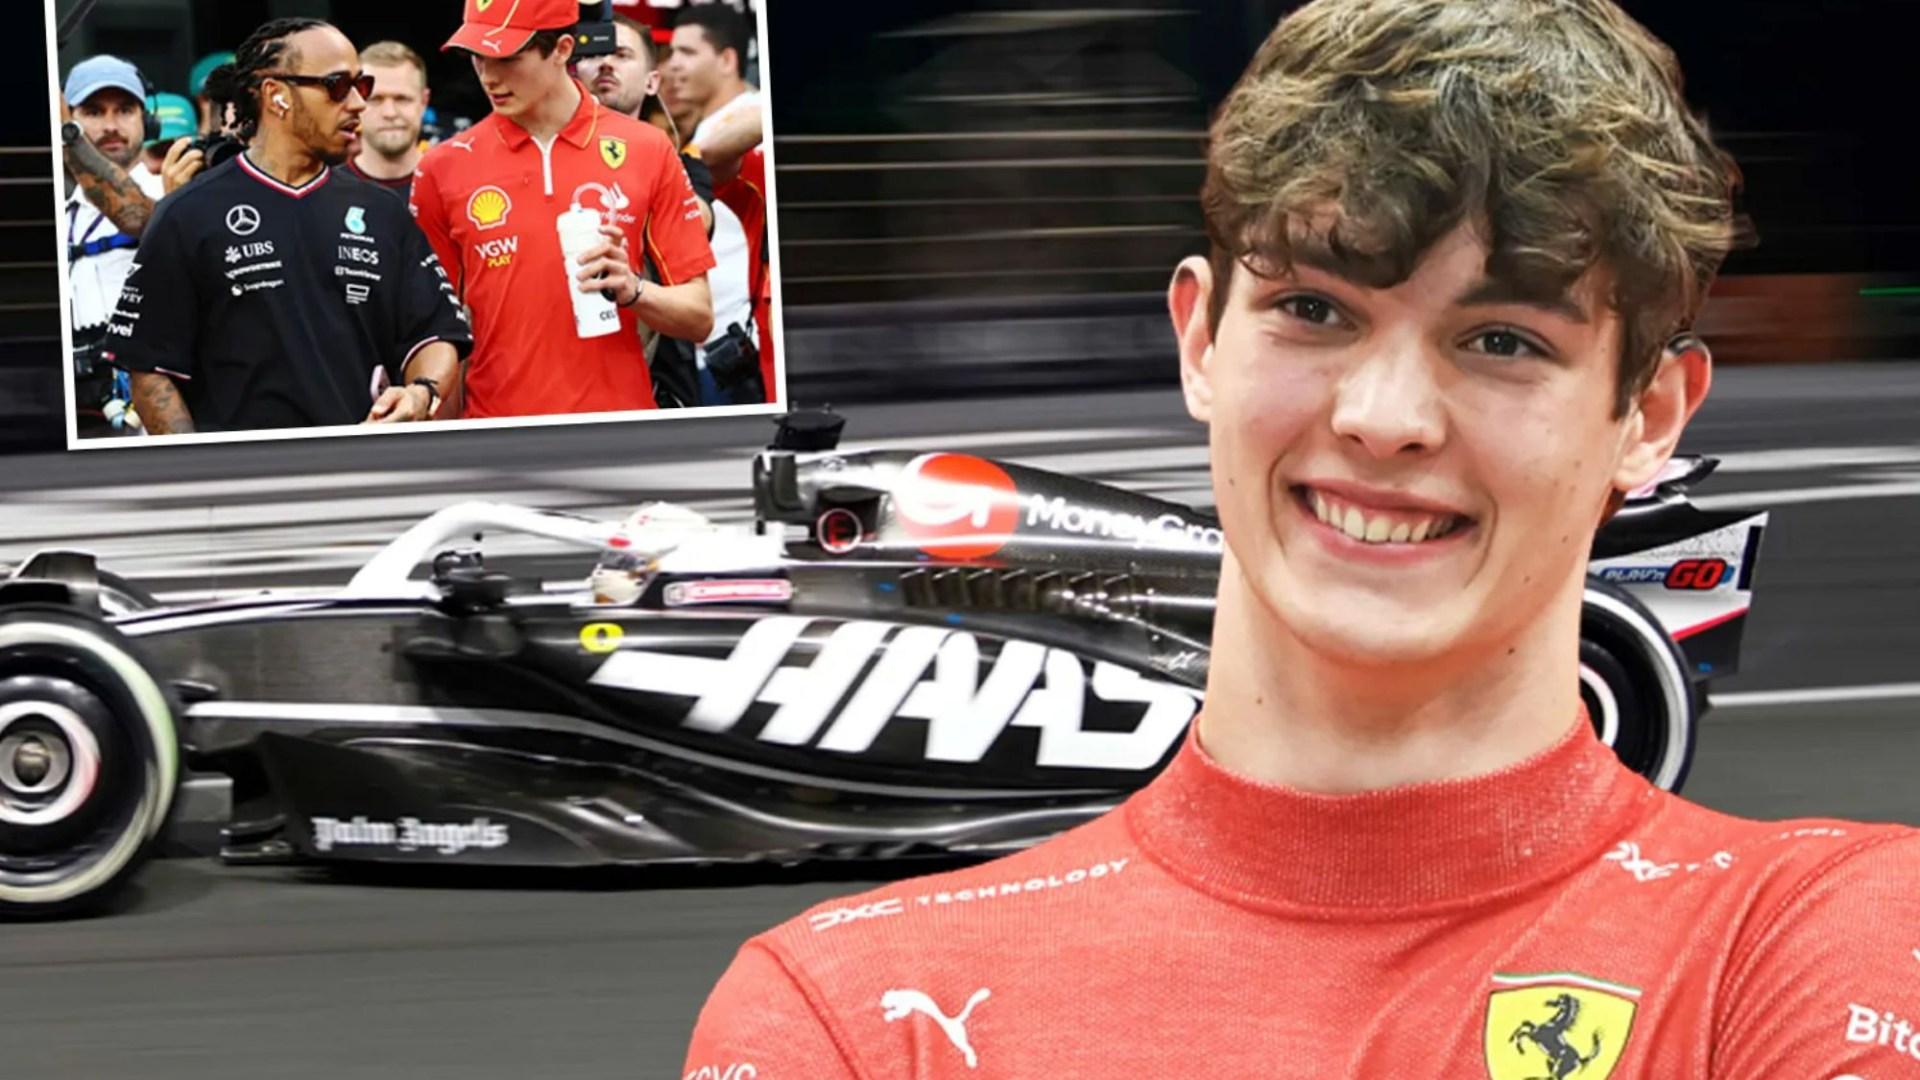 Oliver Bearman set to return to F1 next season with different team after beating Lewis Hamilton on debut for Ferrari